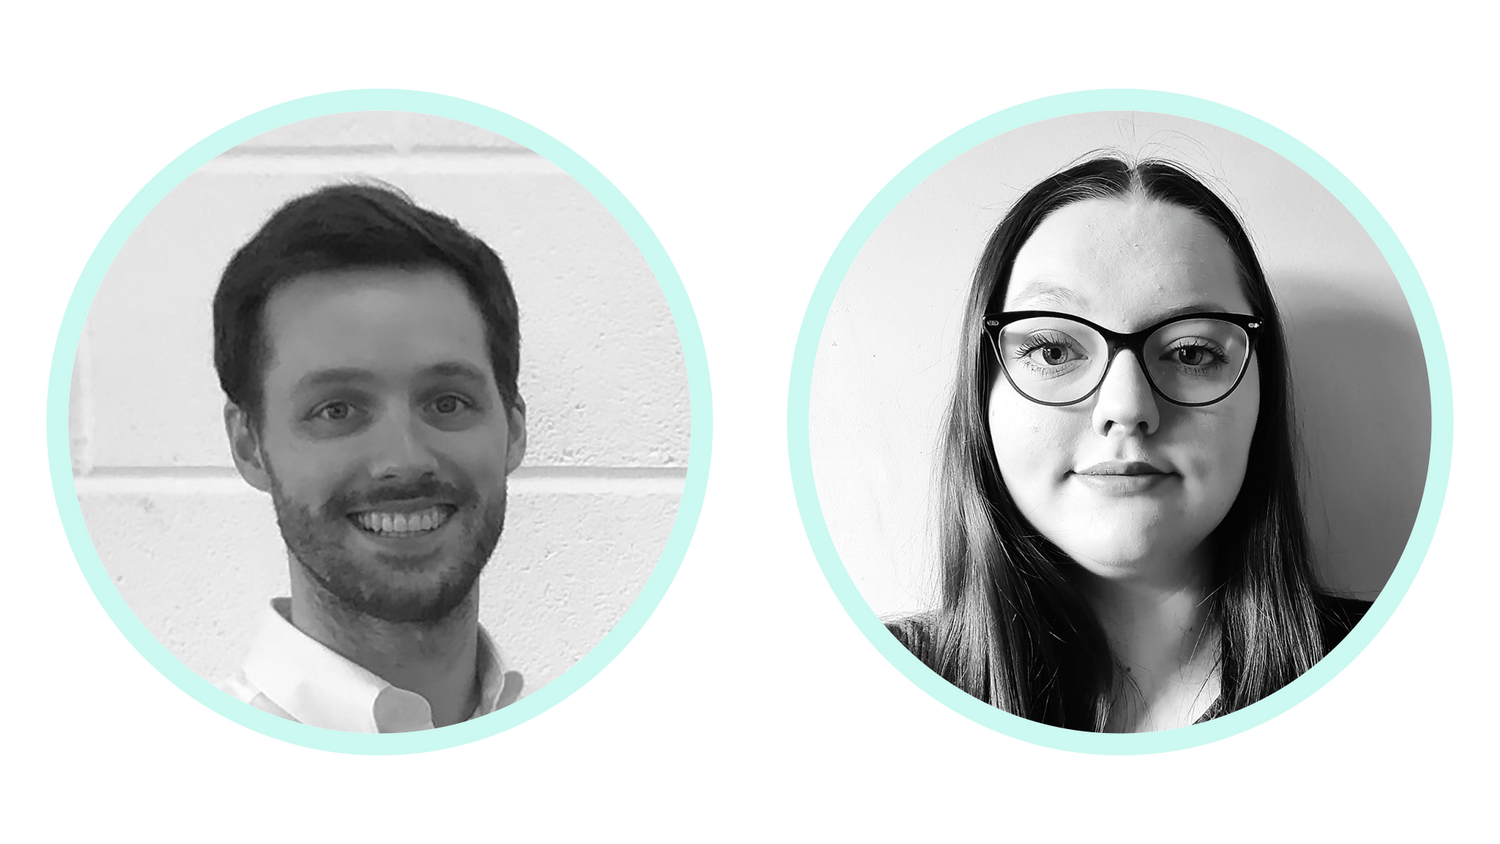 The faces of our customer service team at Sticker it - David & Lauren